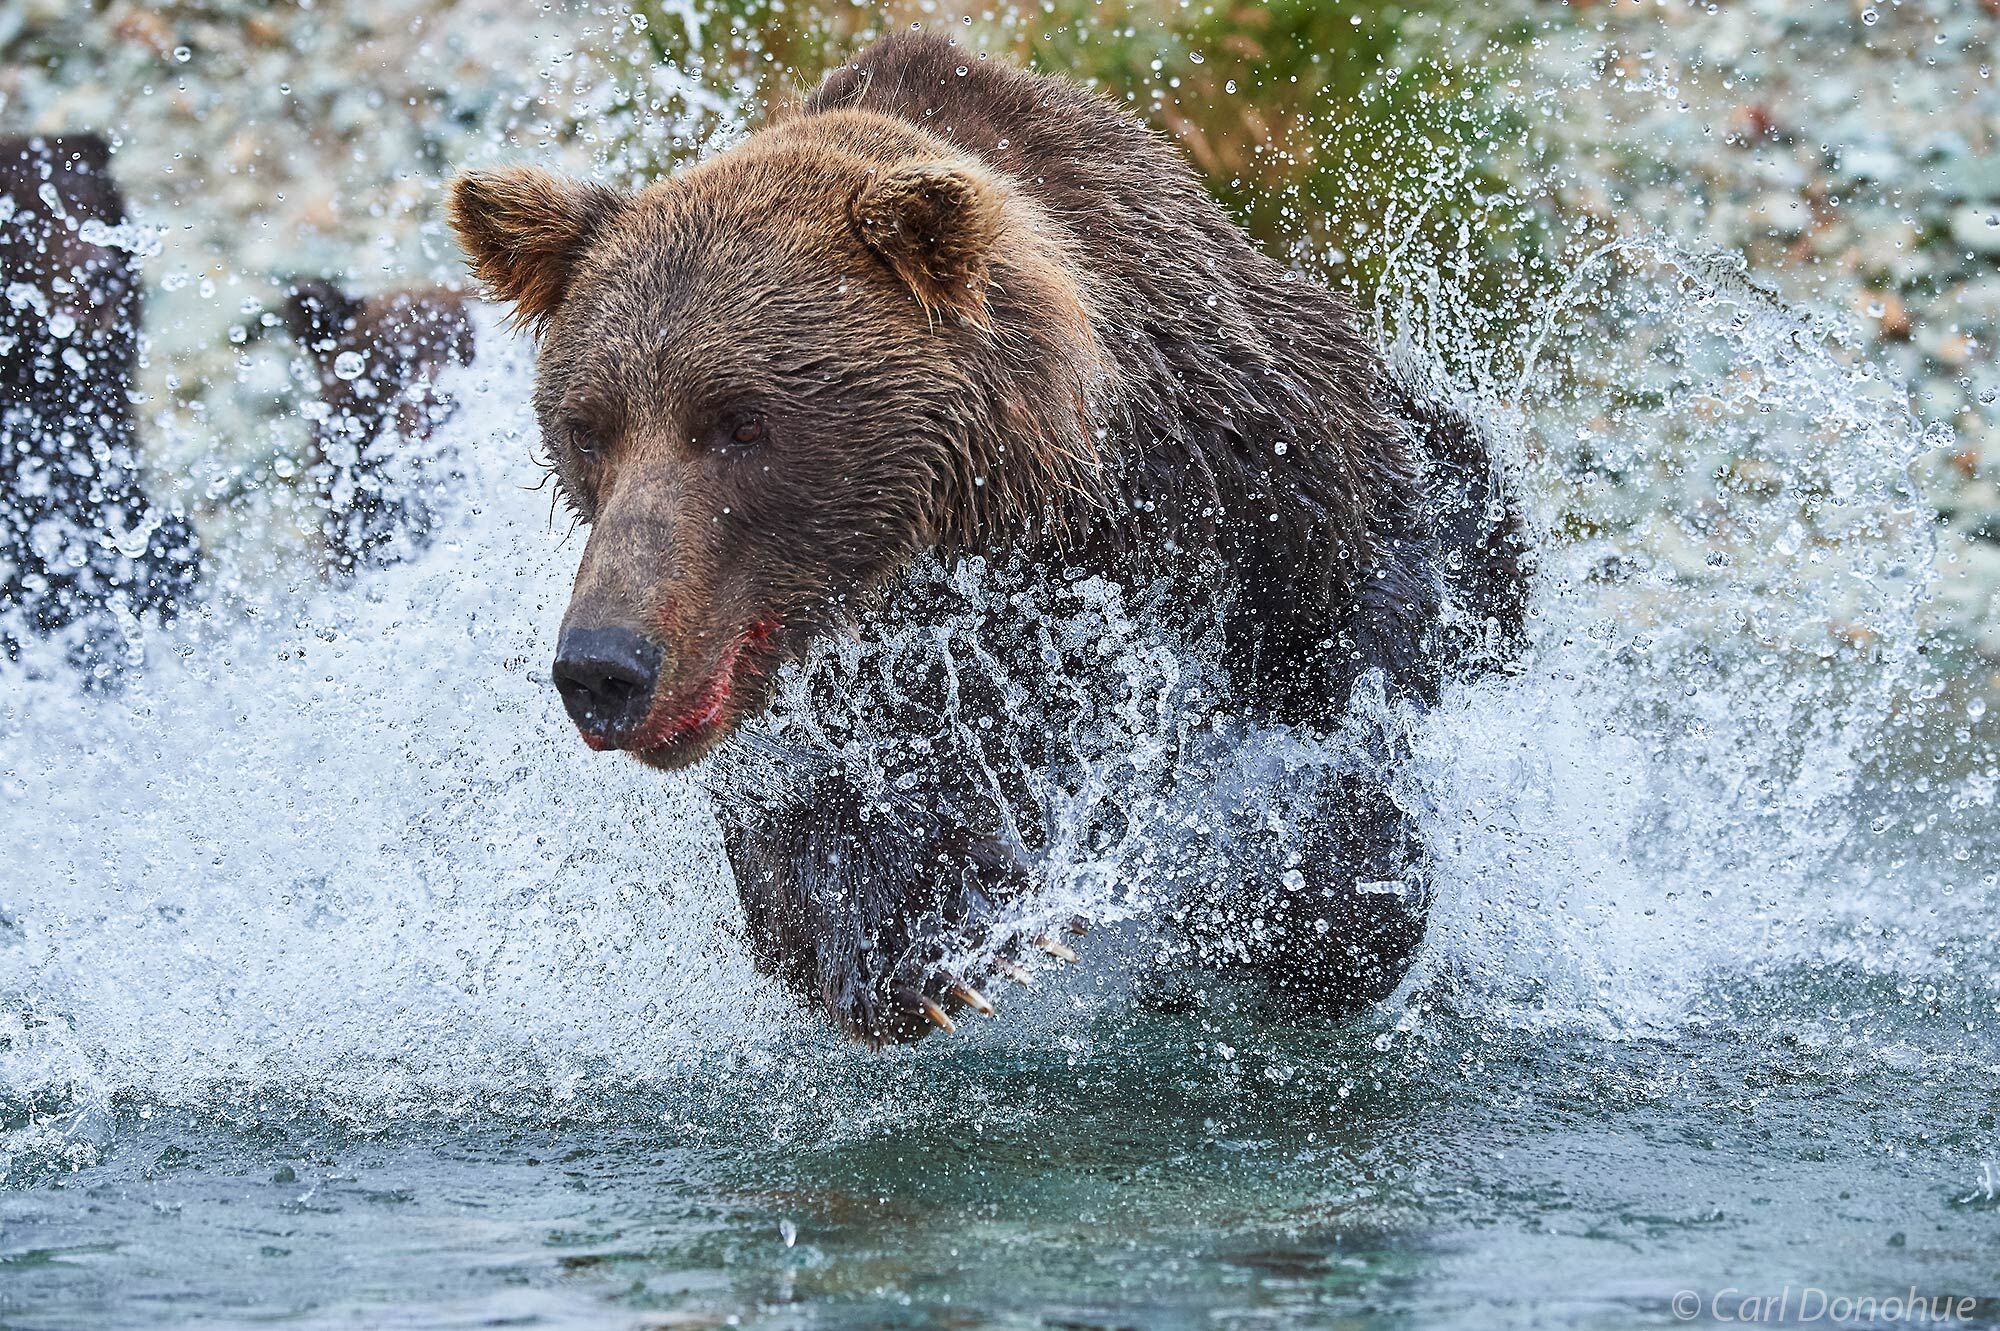 Female grizzly bear or brown bear chasing after salmon in a small stream, Katmai National Park and Preserve, Alaska.